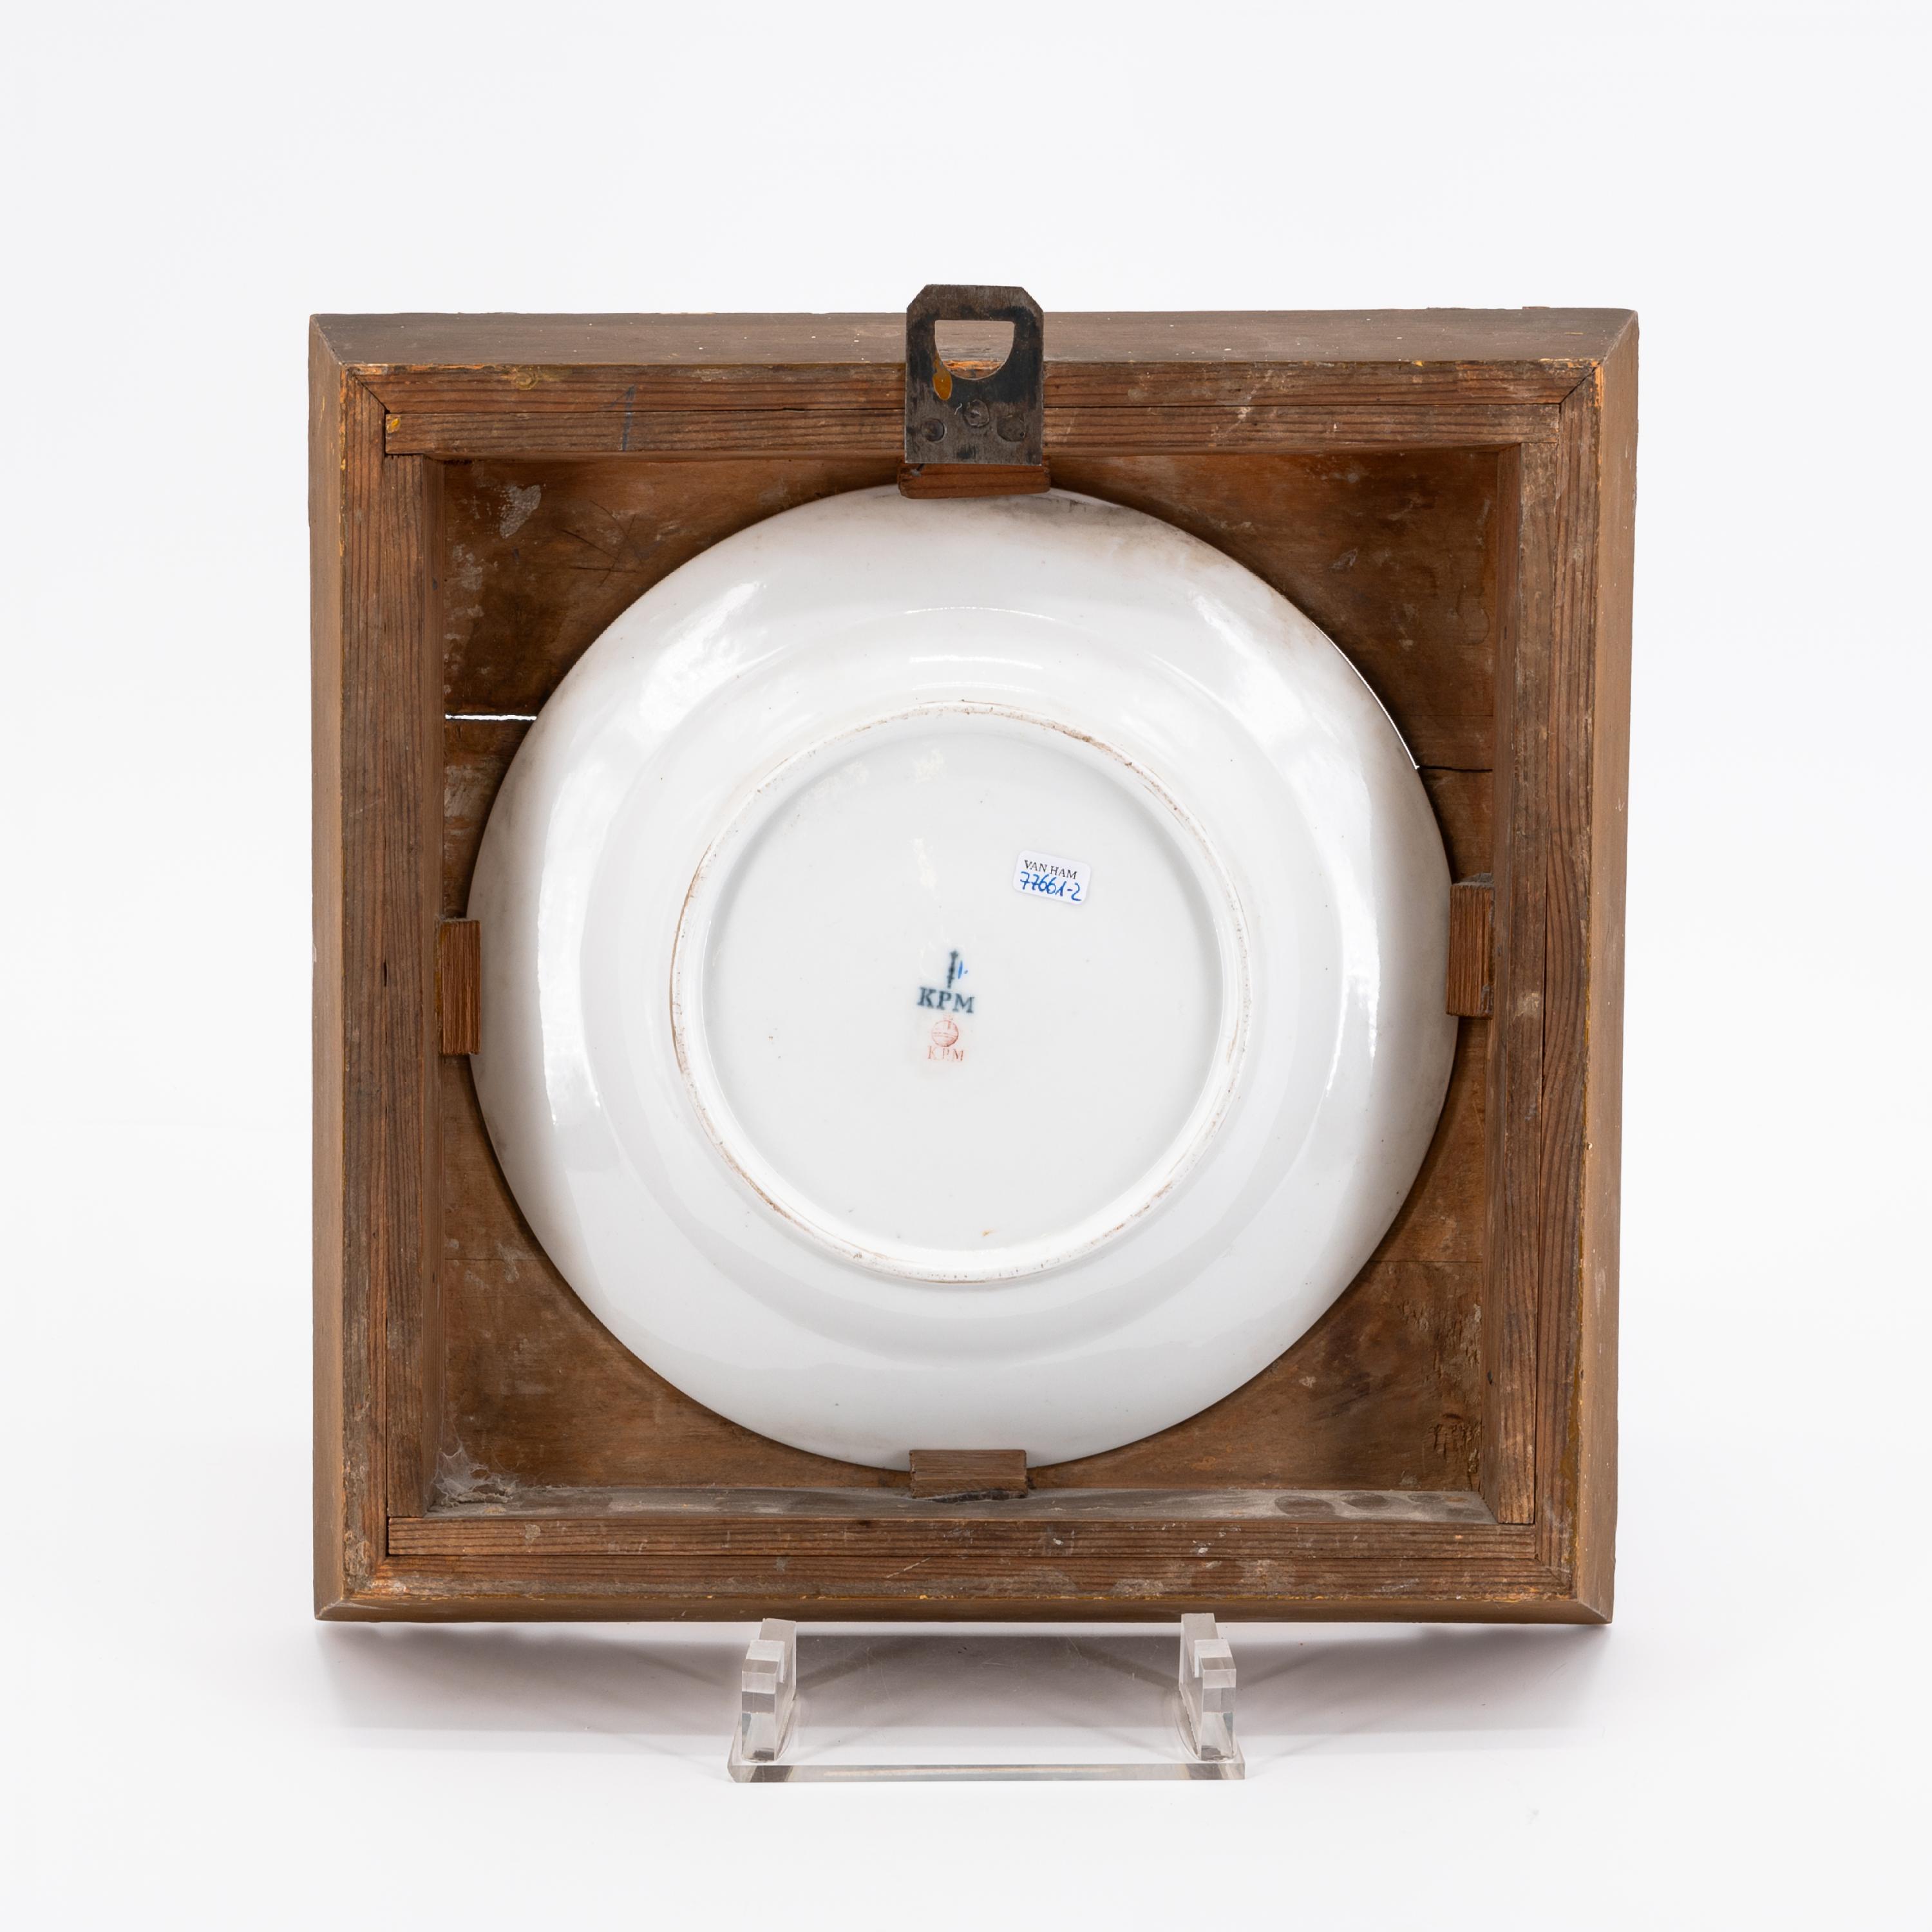 EXEPTIONAL SERIES OF TWELVE PORCELAIN PLATES WITH ROMANTIC VIEWS OF THE RHINE - Image 10 of 26